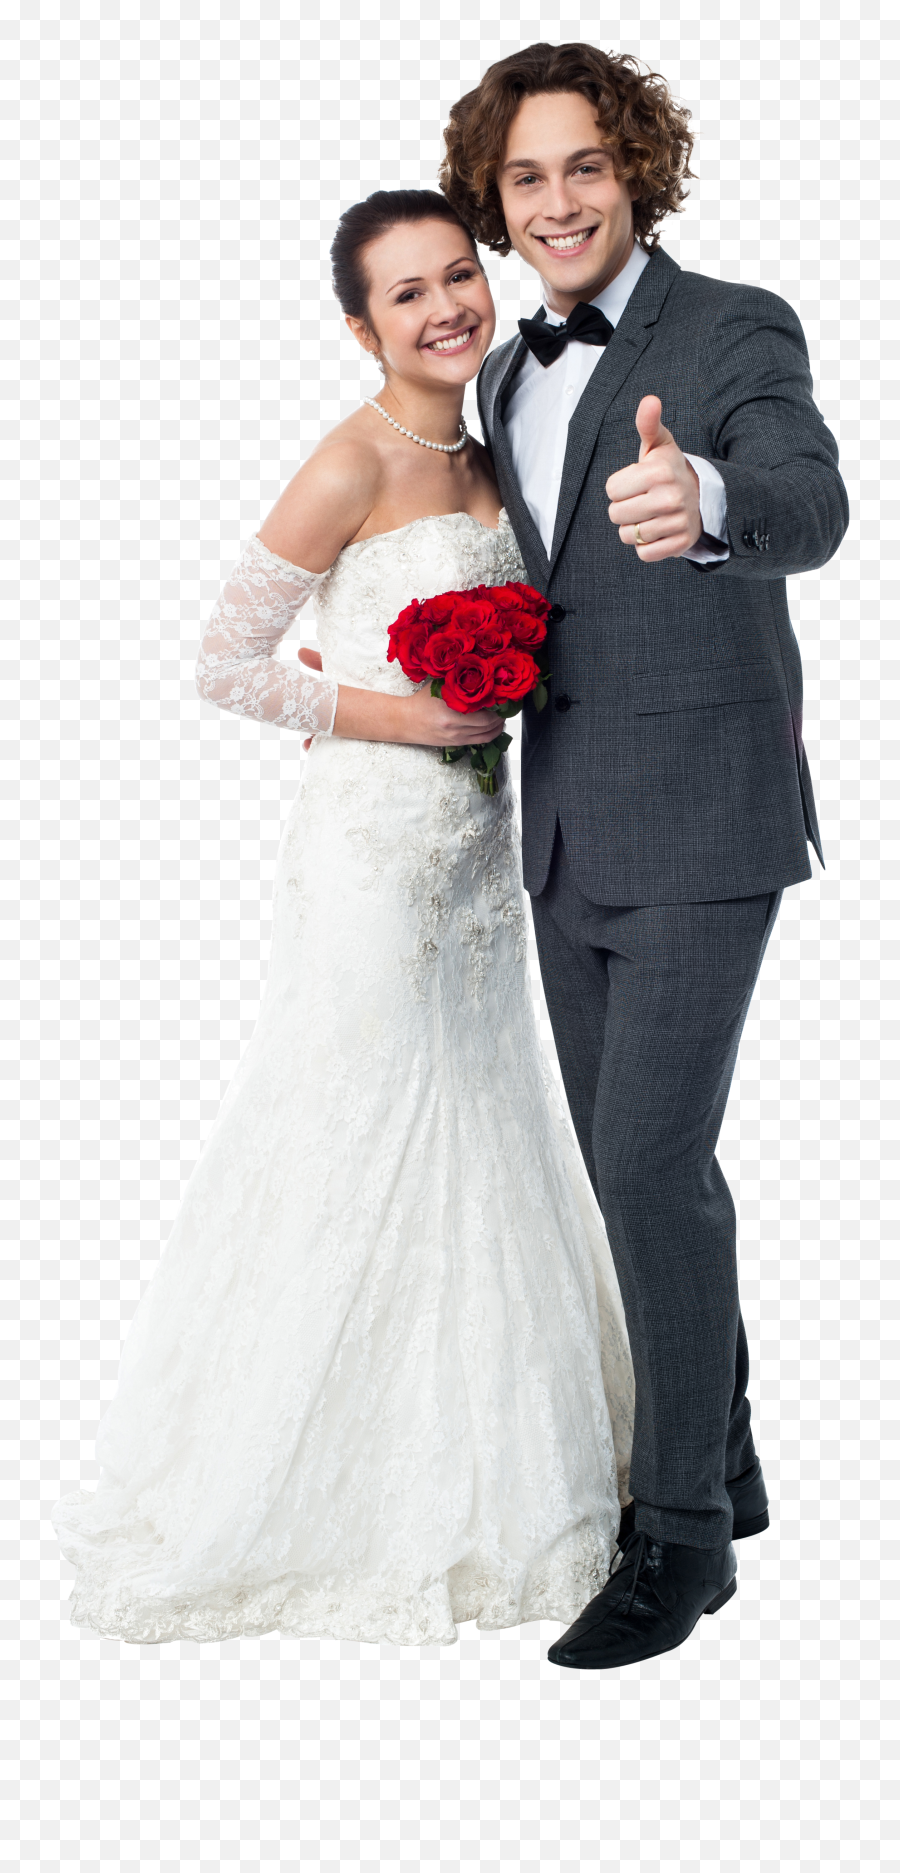 Wedding Couple Free Commercial Use Png Image - Wedding Wedding Emoji,Free Png Images For Commercial Use